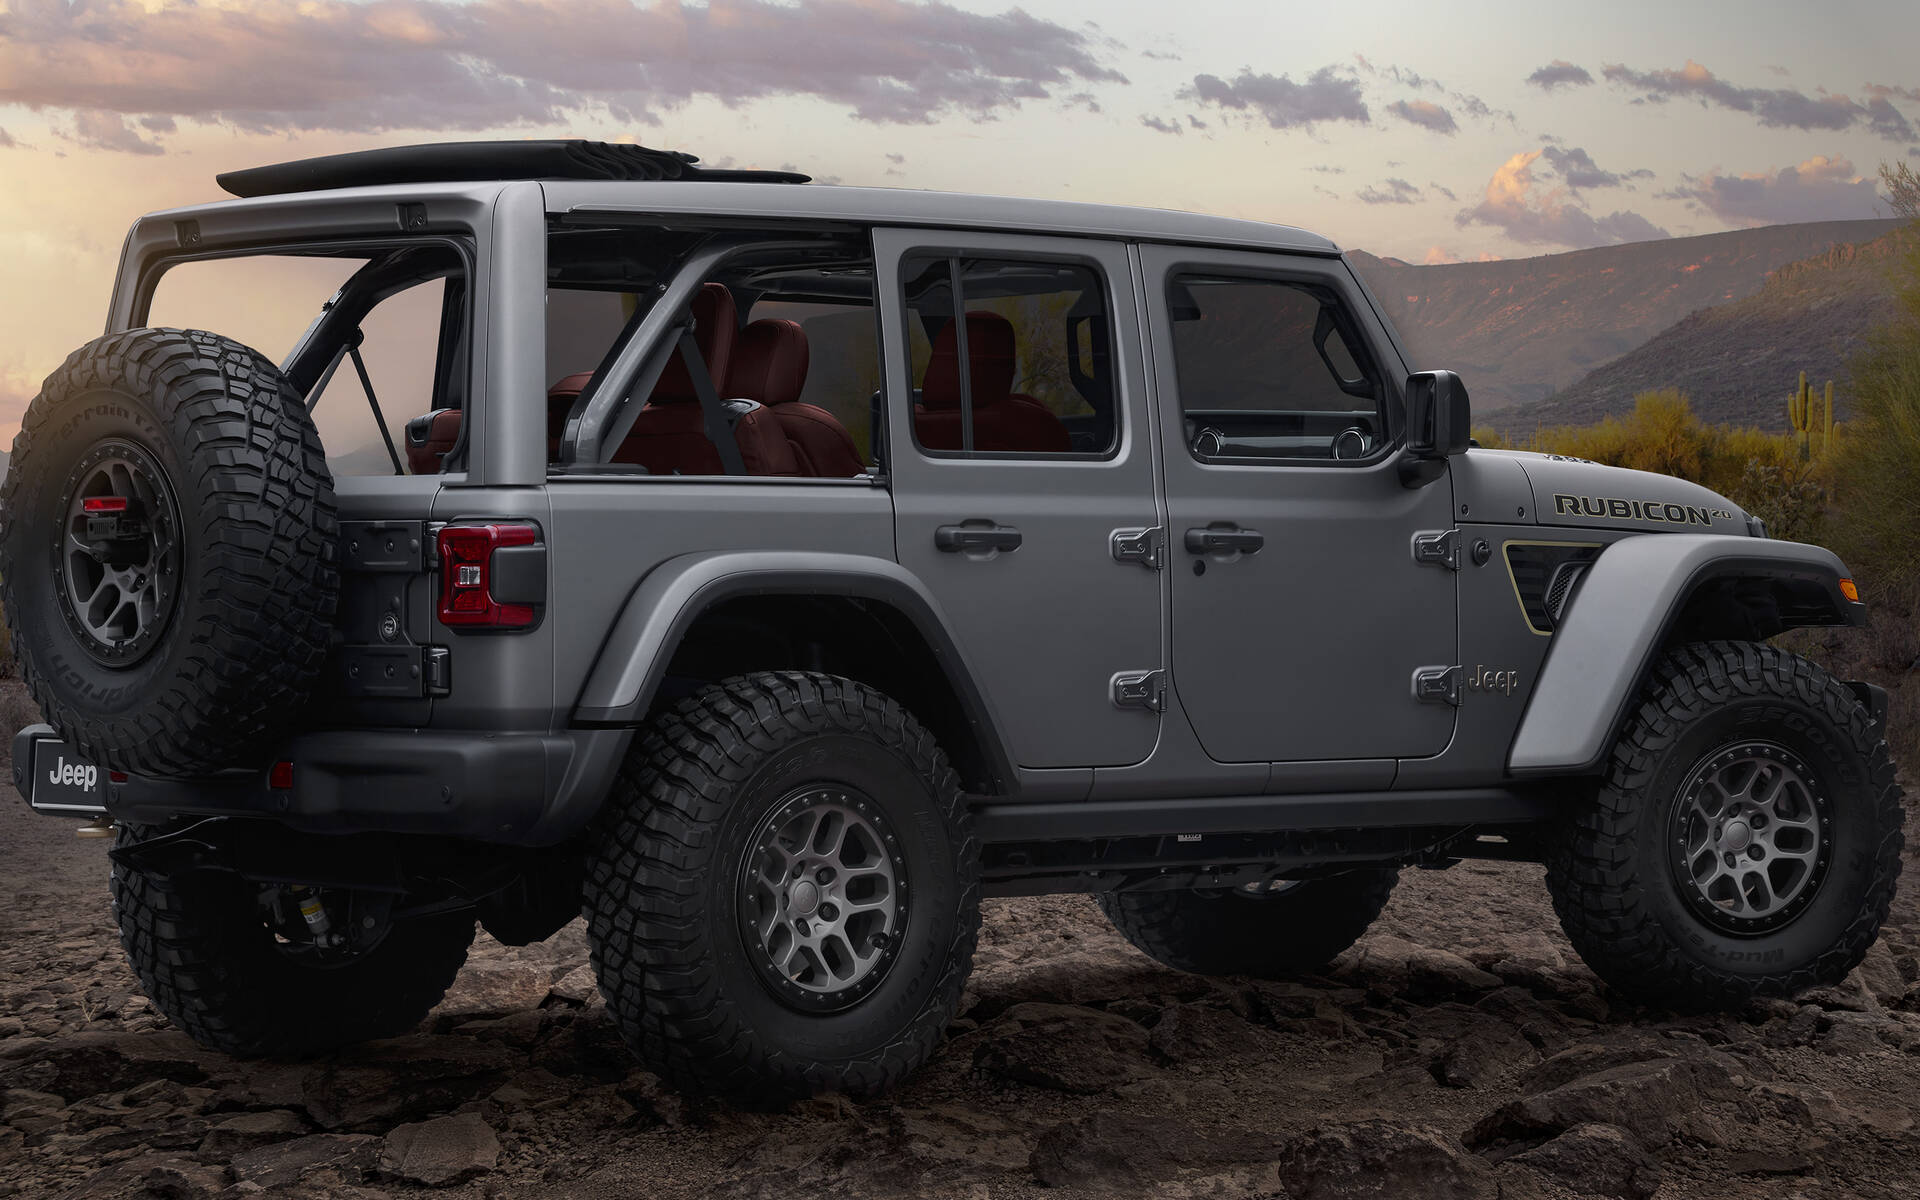 <p><strong>Jeep Rubicon 20th Anniversary Concept</strong></p>